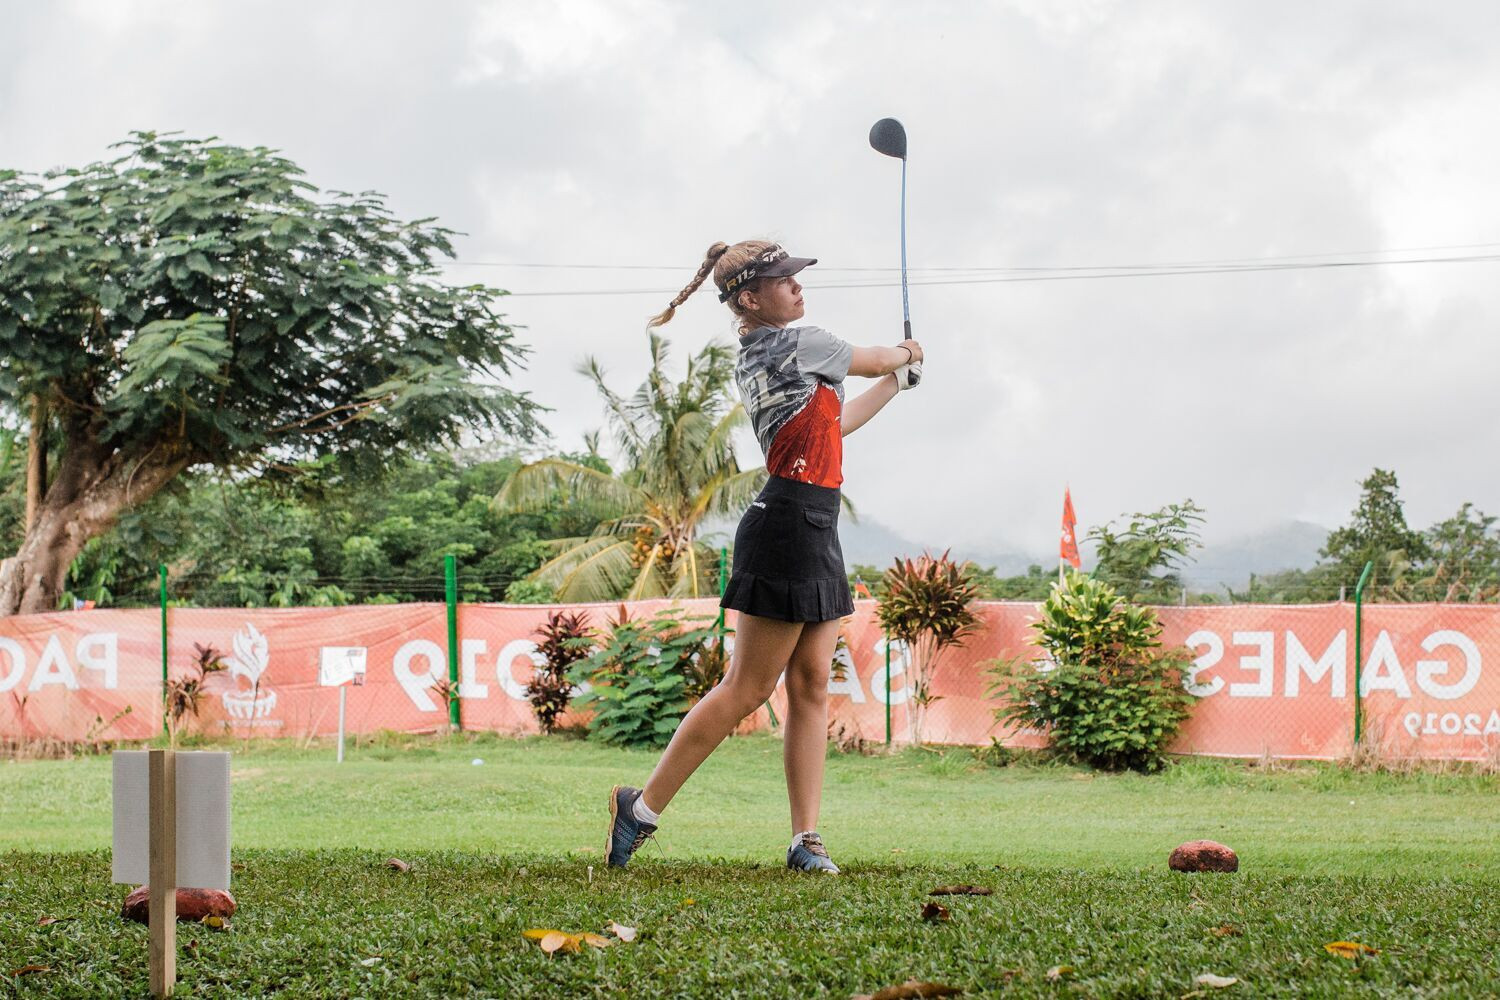 The sixth day of competition overall was also the final day in the golf ©Samoa 2019